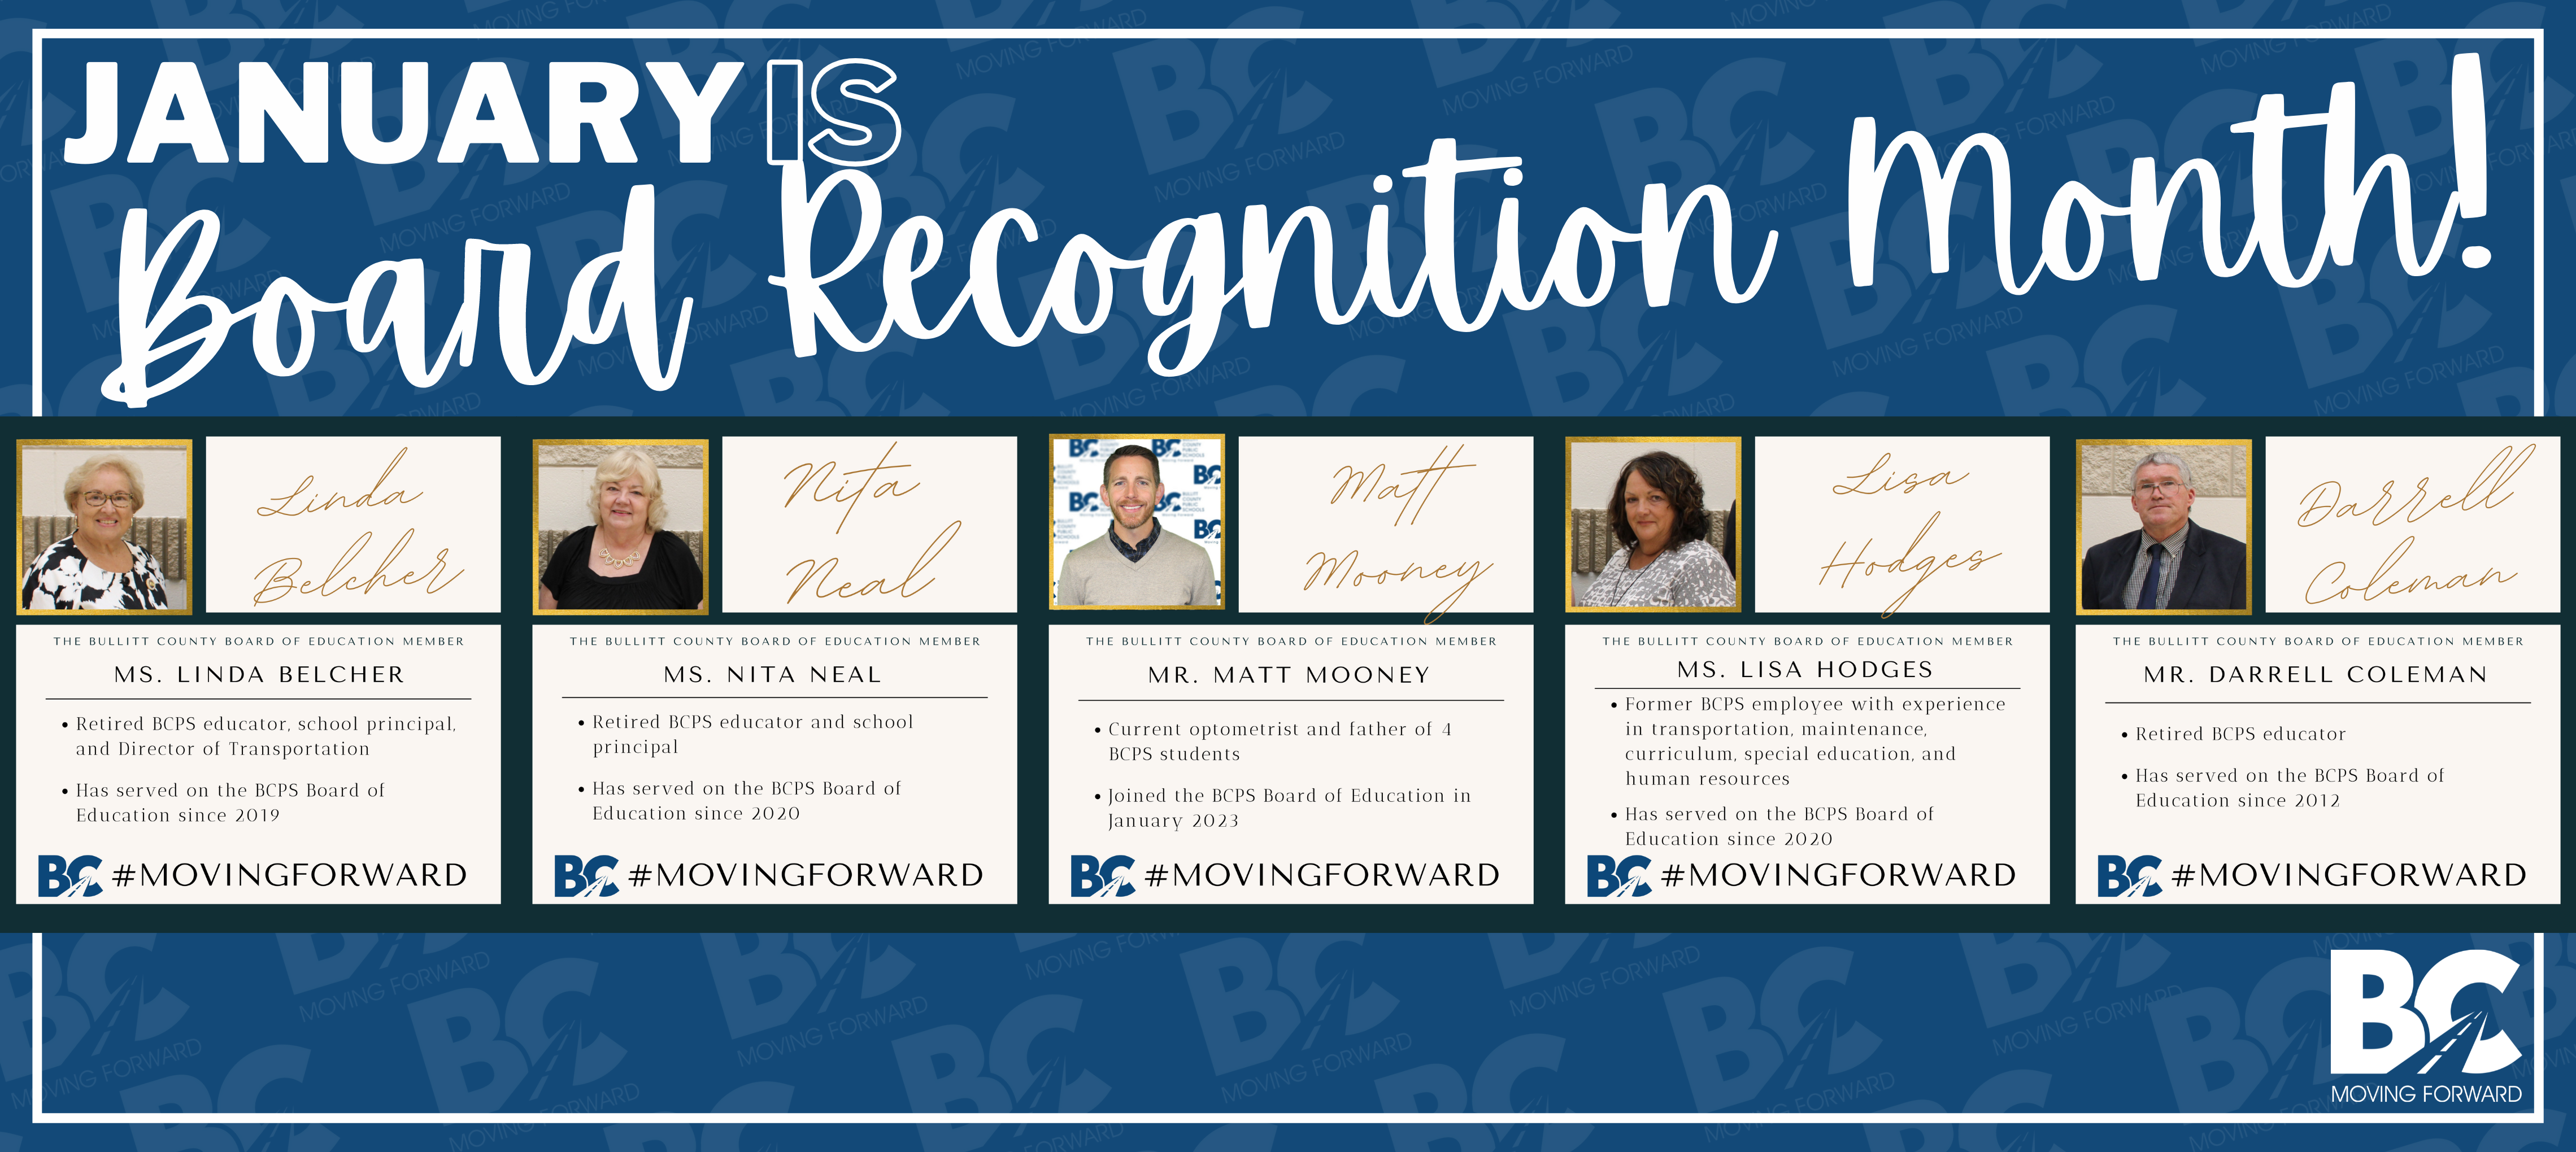 January is Board Recognition Month